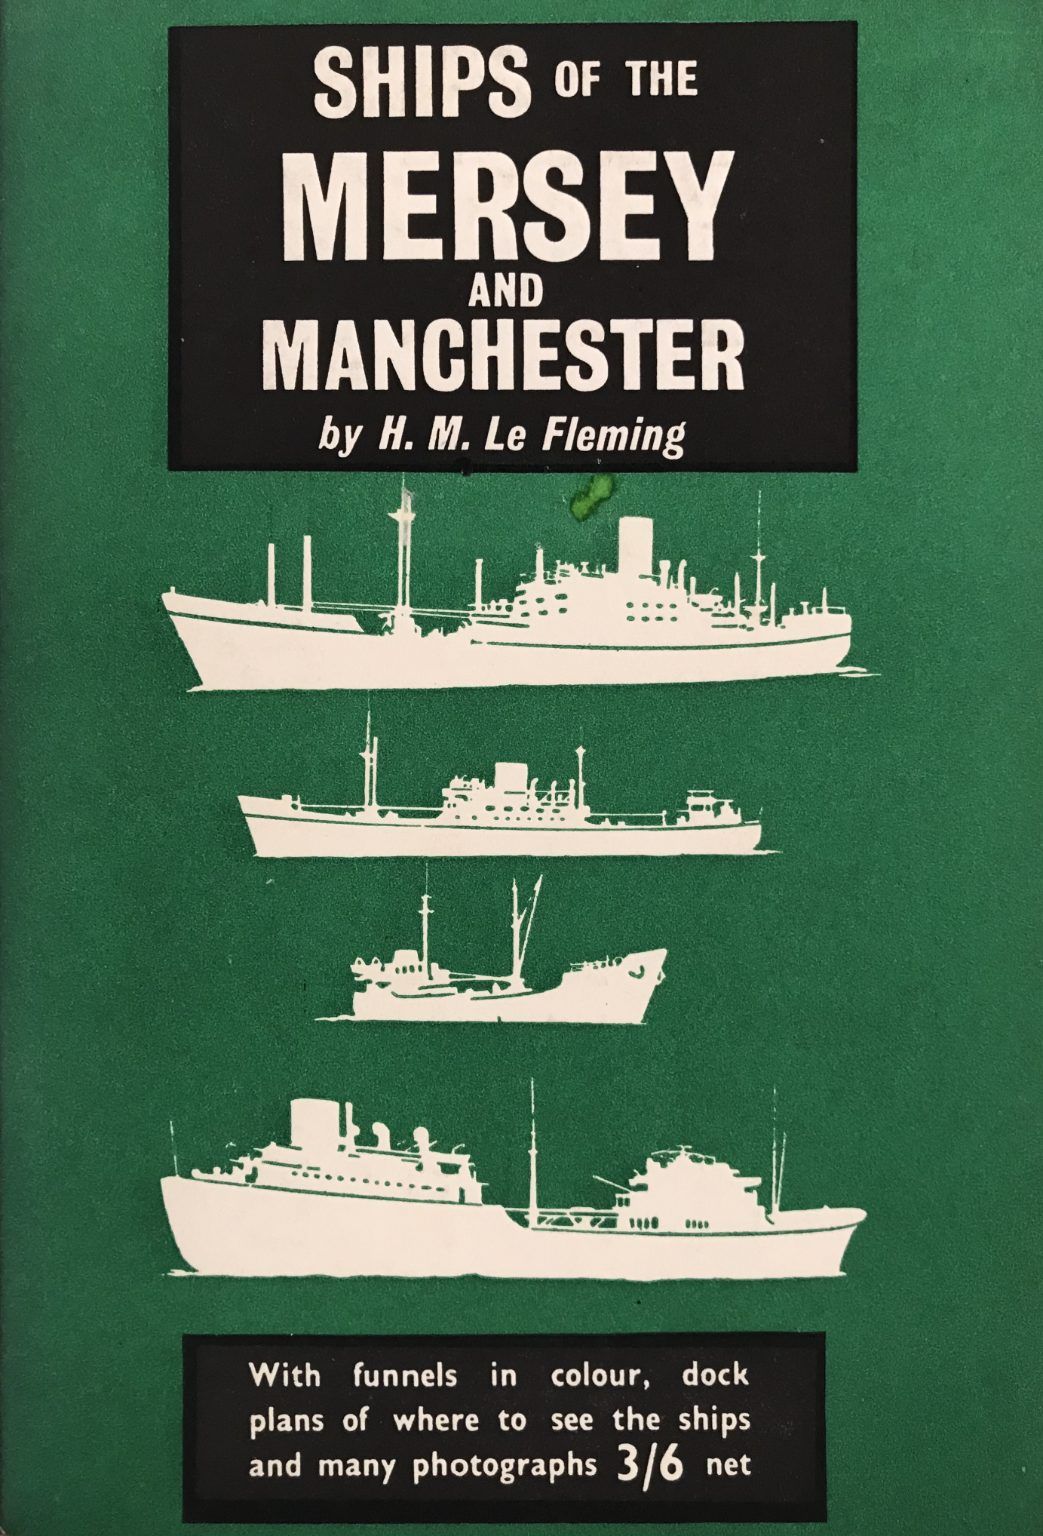 SHIPS OF THE MERSEY AND MANCHESTER